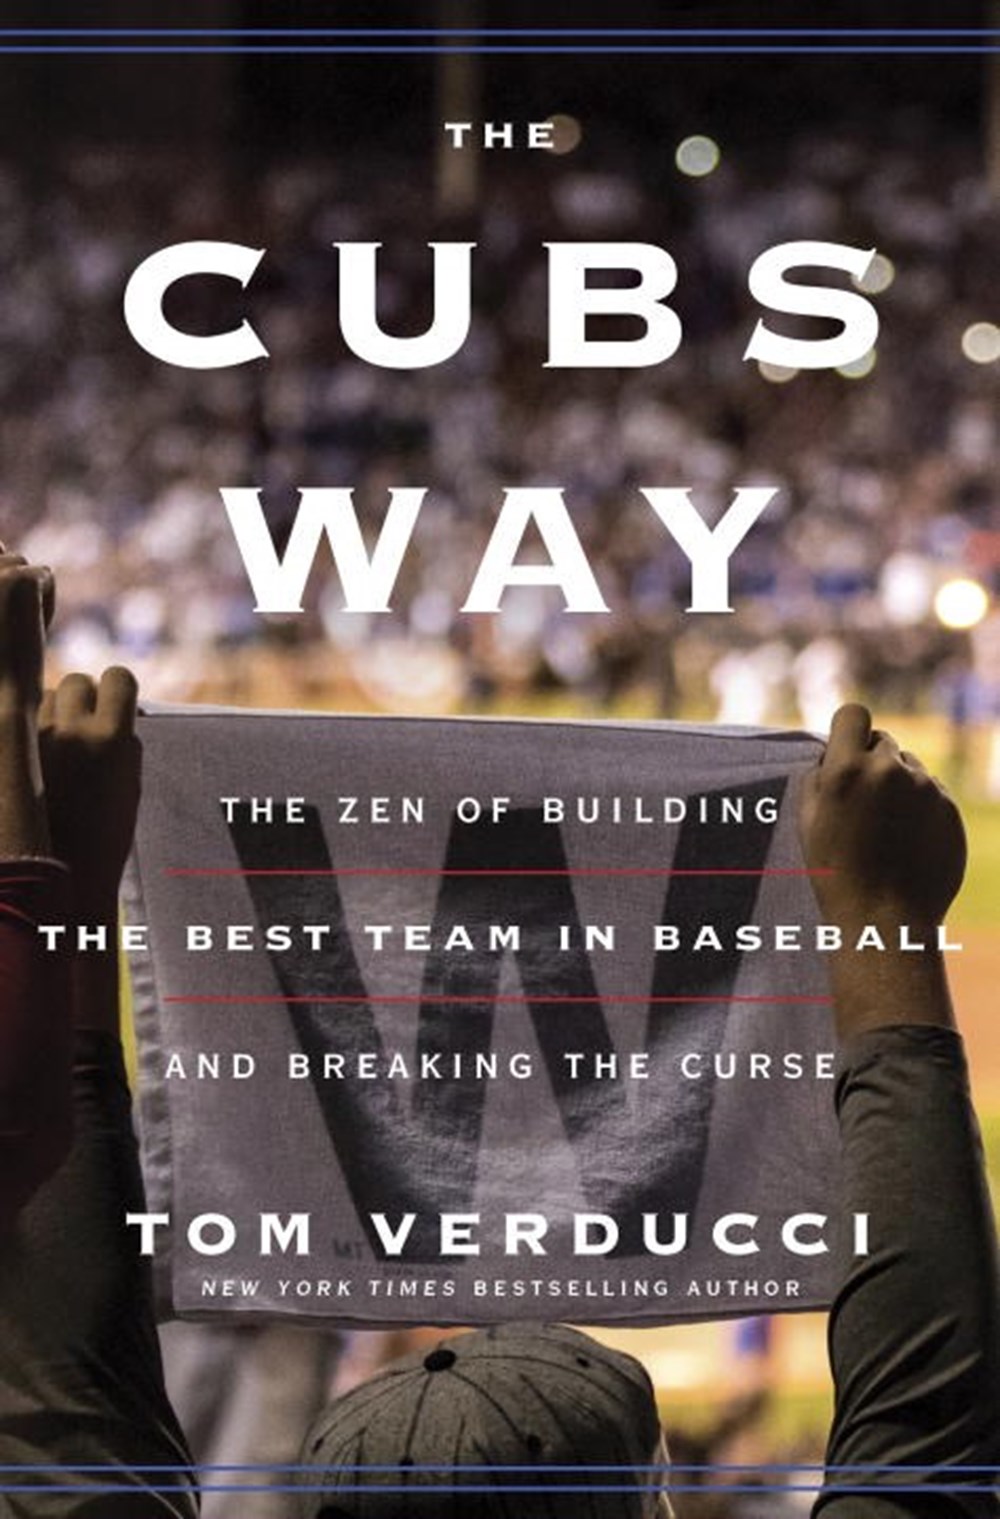 Cubs Way: The Zen of Building the Best Team in Baseball and Breaking the Curse